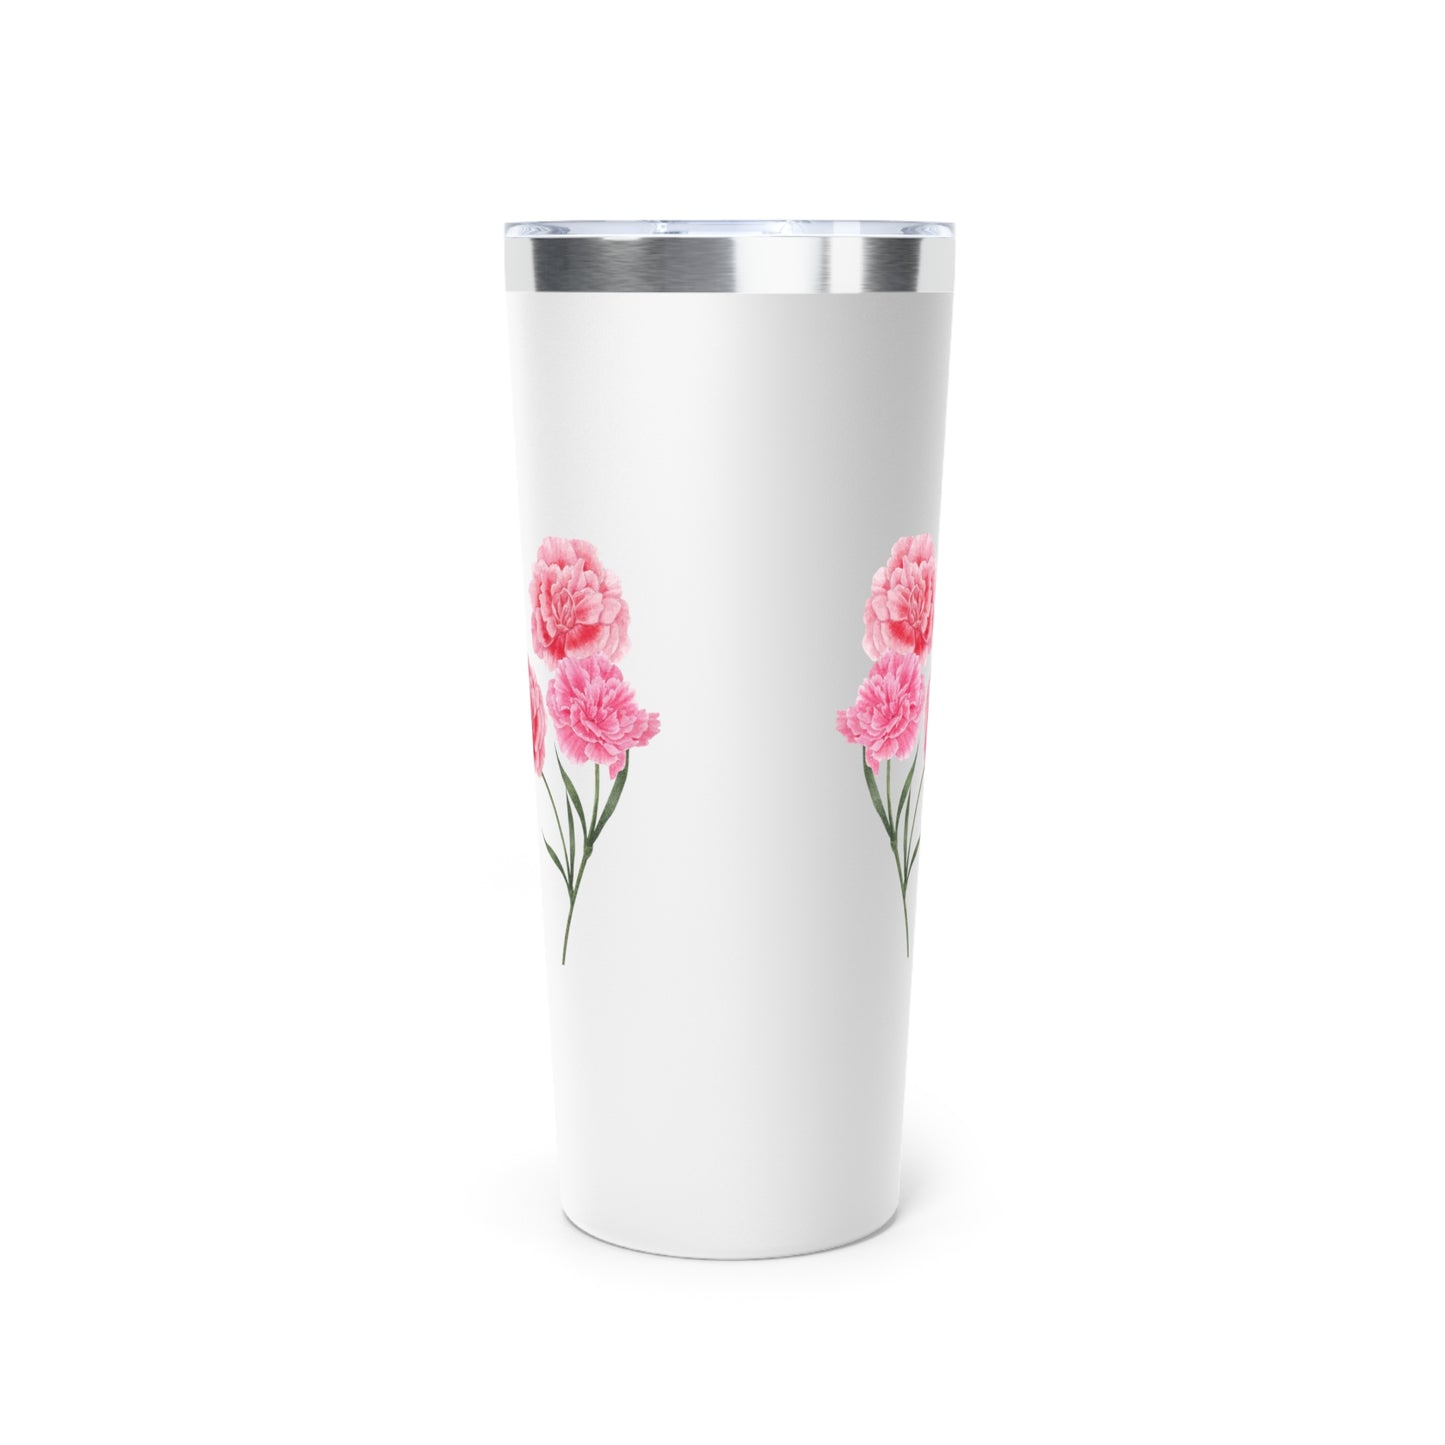 Personalized Birth Flower Tumbler, Personalized Birth Flower Coffee Cup With Name, Gifts for Her, Bridesmaid Proposal, Party Favor